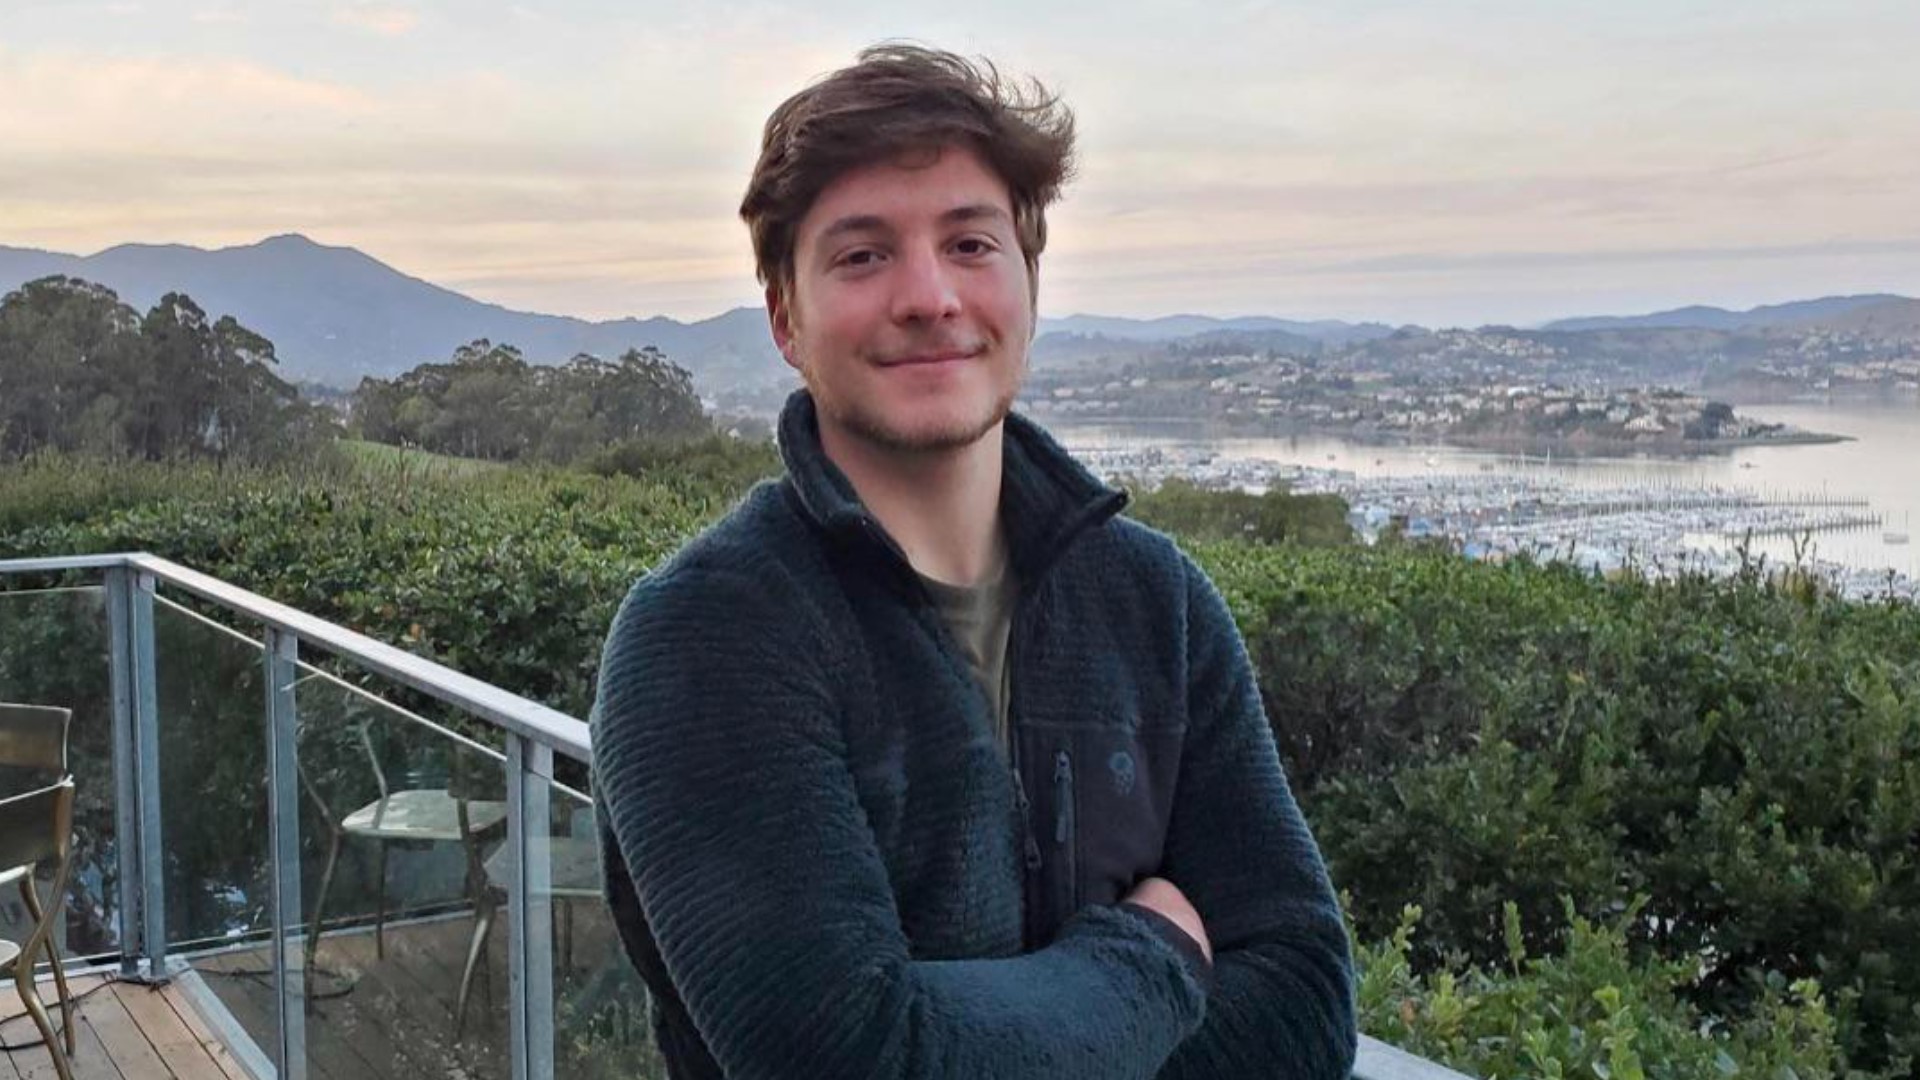 "[He] had seen the incredible beauty of San Diego and so he wanted to spend his last semester of his senior year in college here," said mom Laurie Yoler.